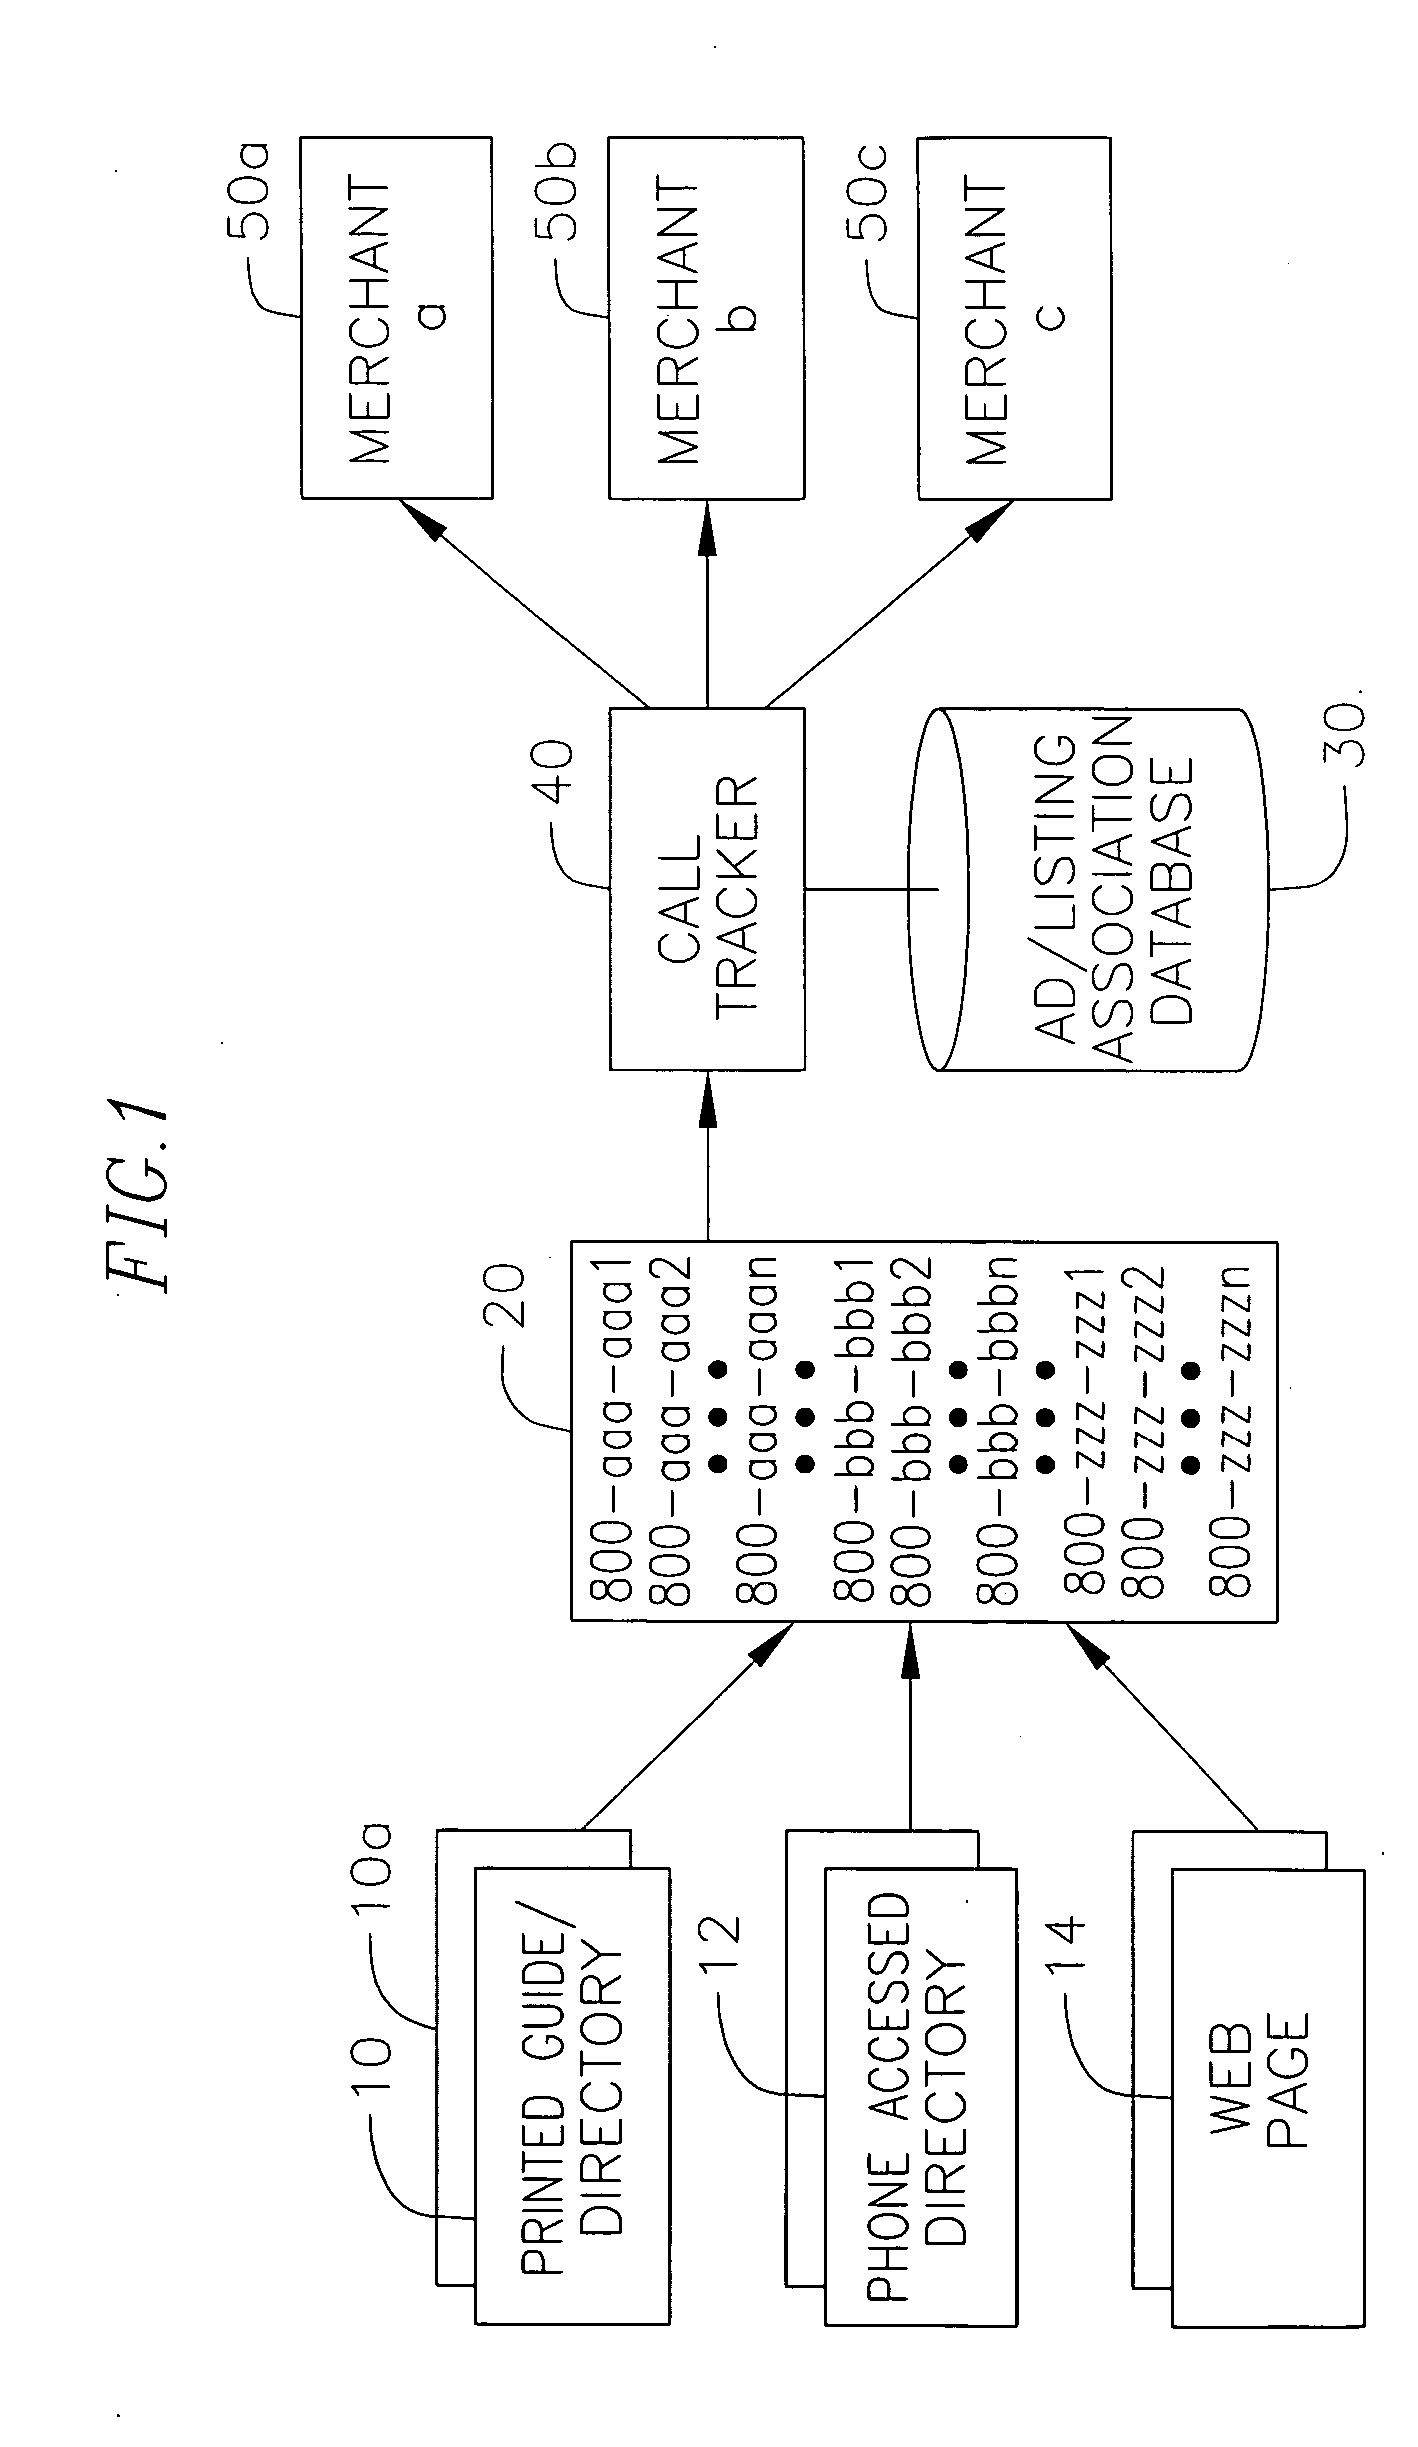 System and method for merchant contact and lead management